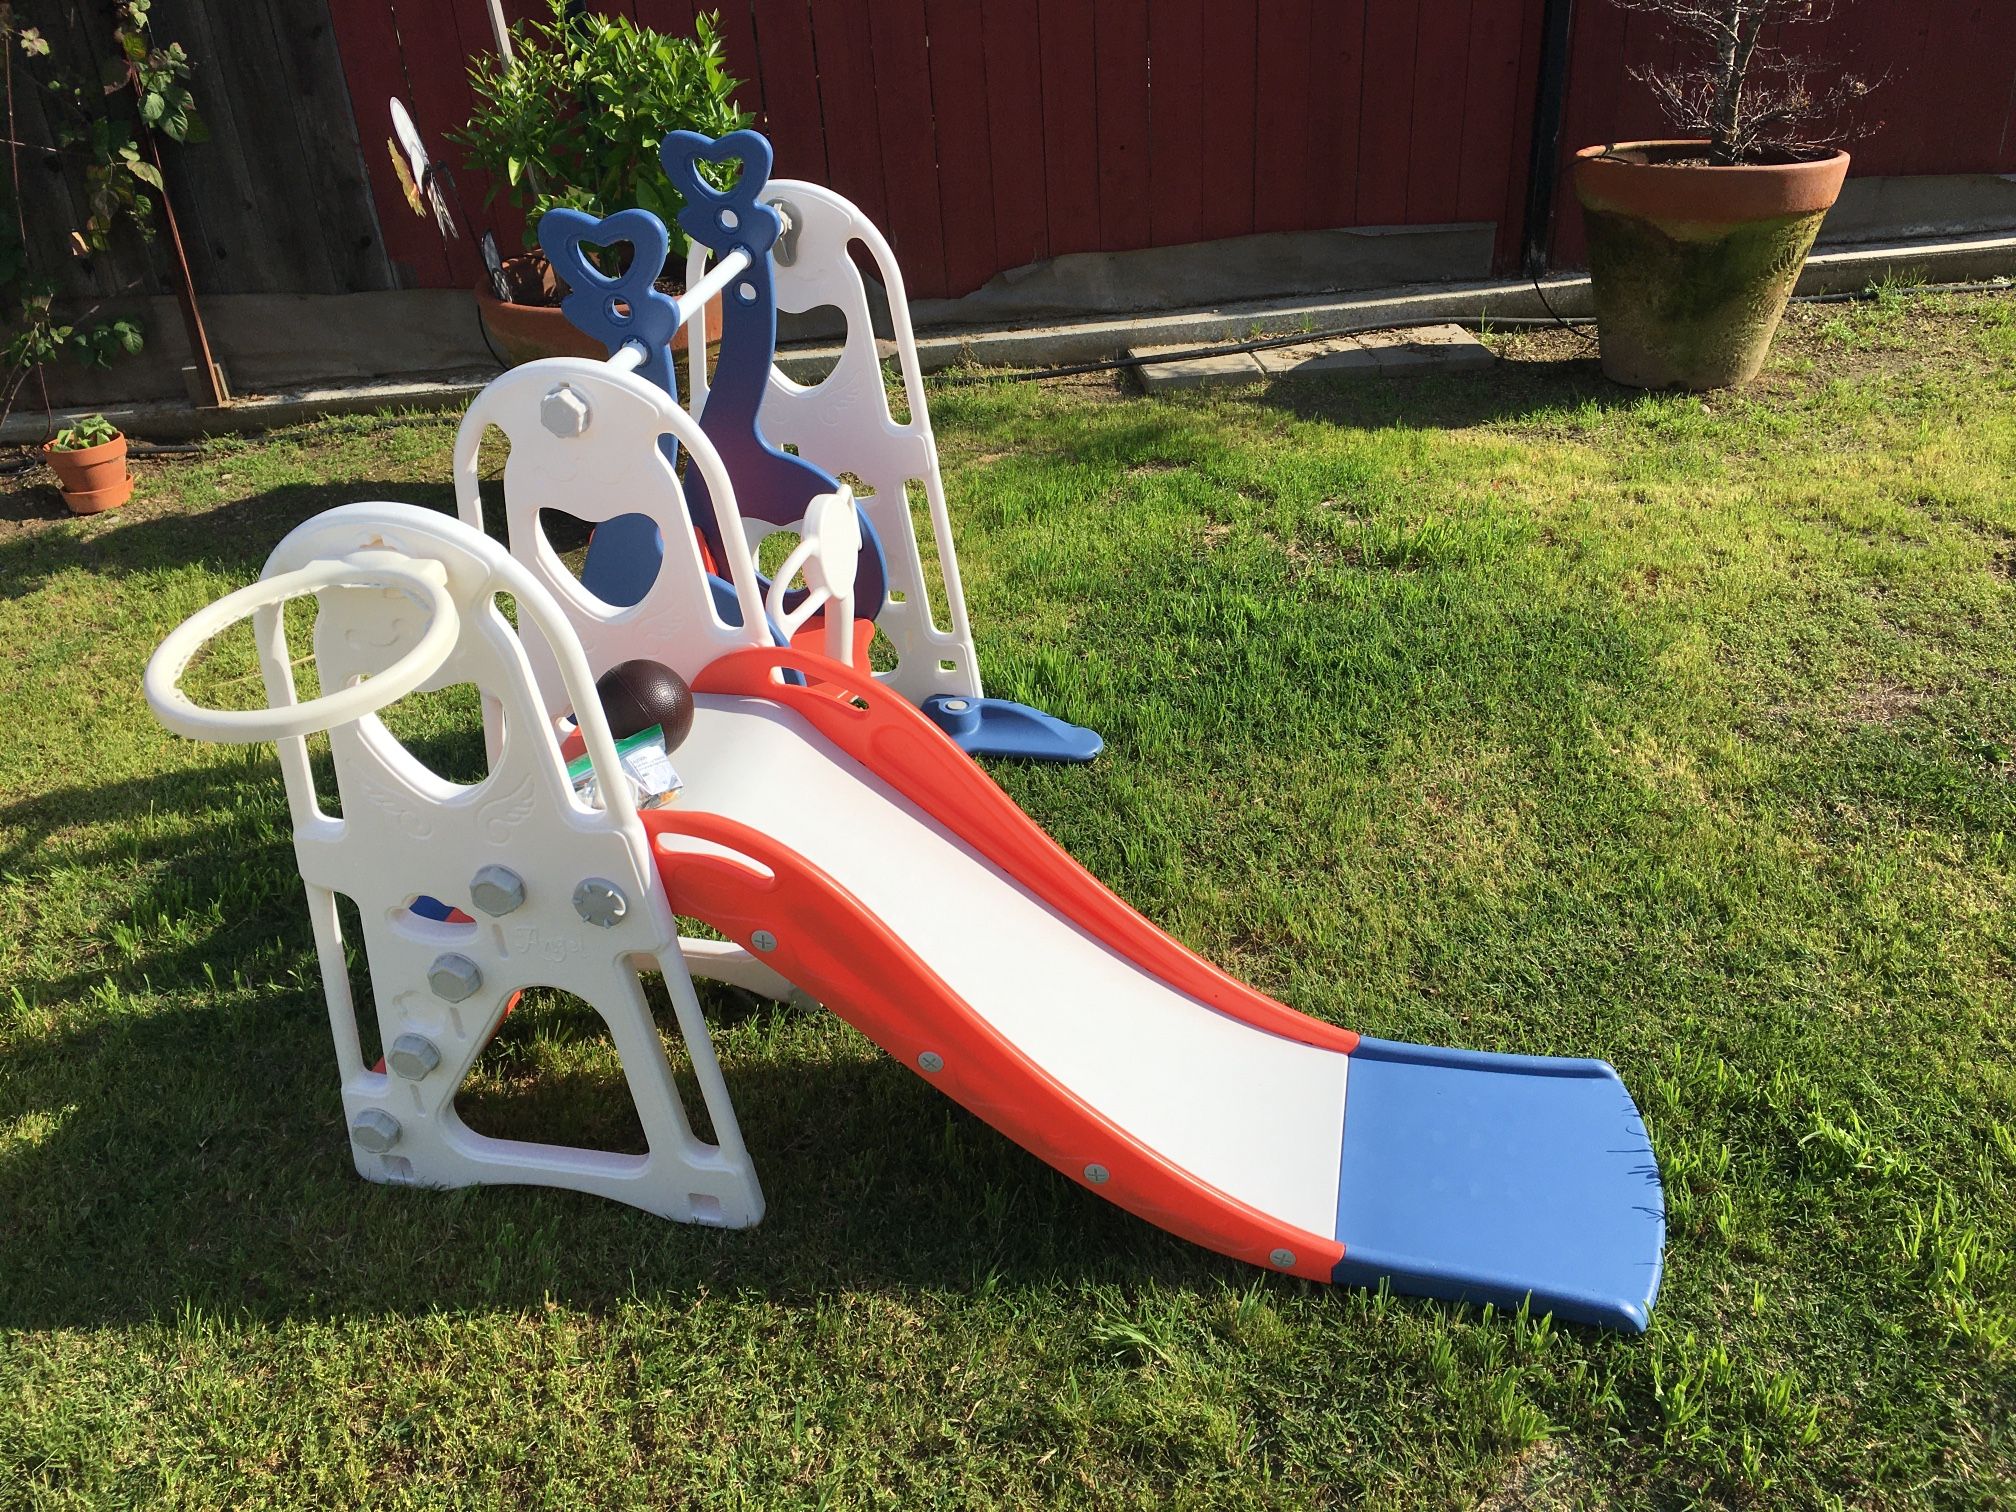 4 in 1 Toddler Swing and Slide Set for Age 1-4 Playground for Children; Orange n Blue